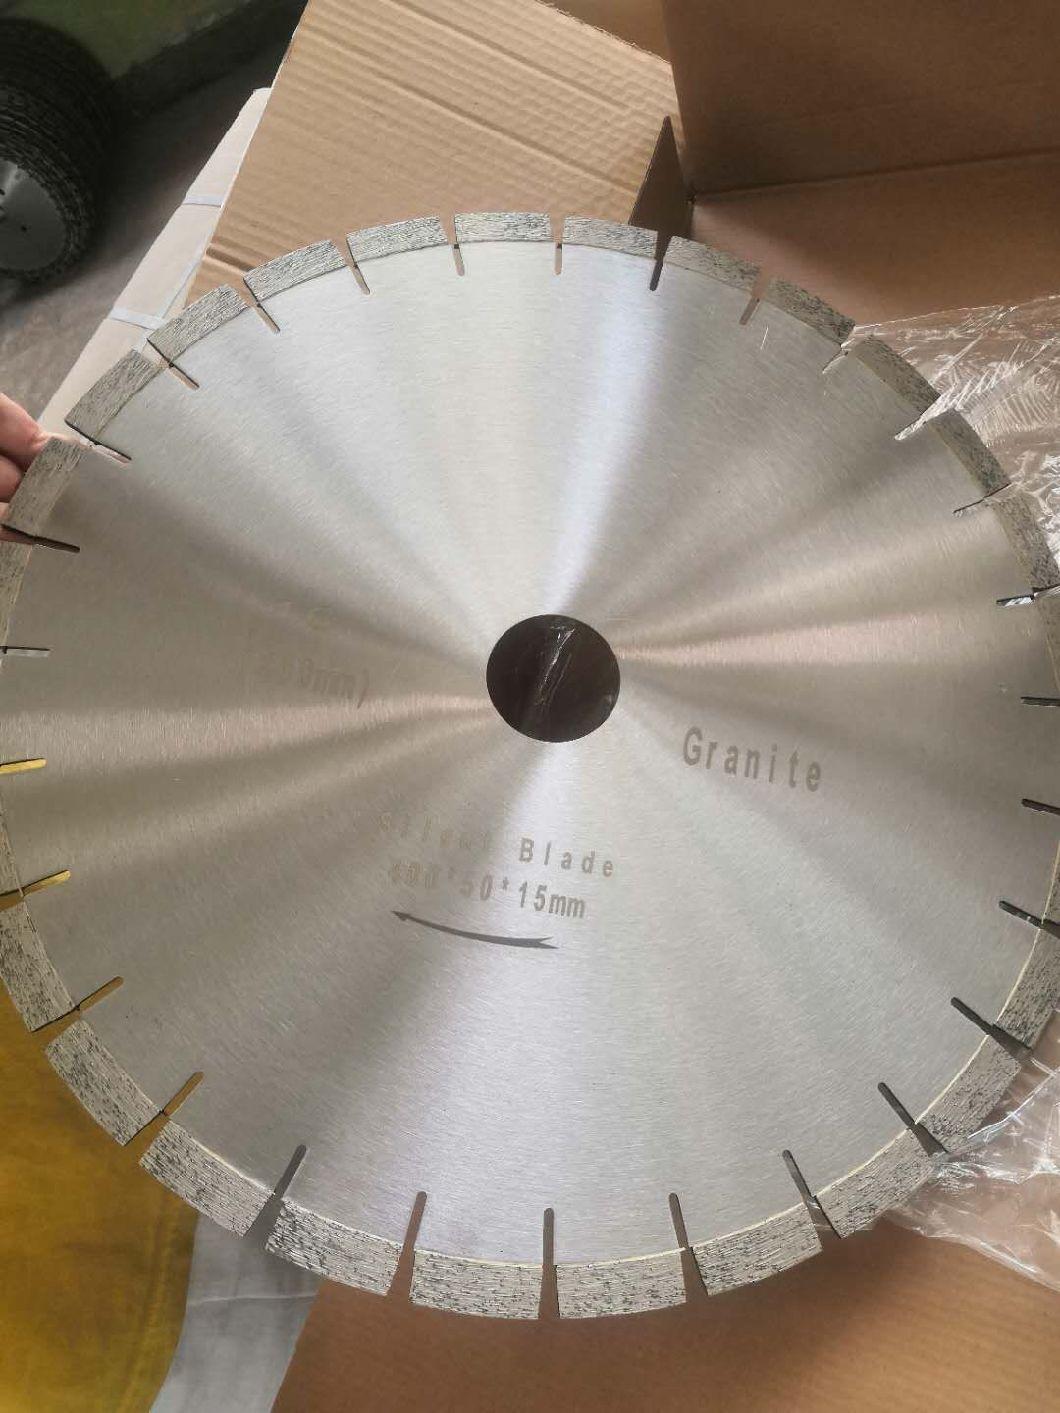 Customized Diamond Saw Blade for Cutting Stone/ Creamics/ Wall/ Concrete/ Fireproofing Material